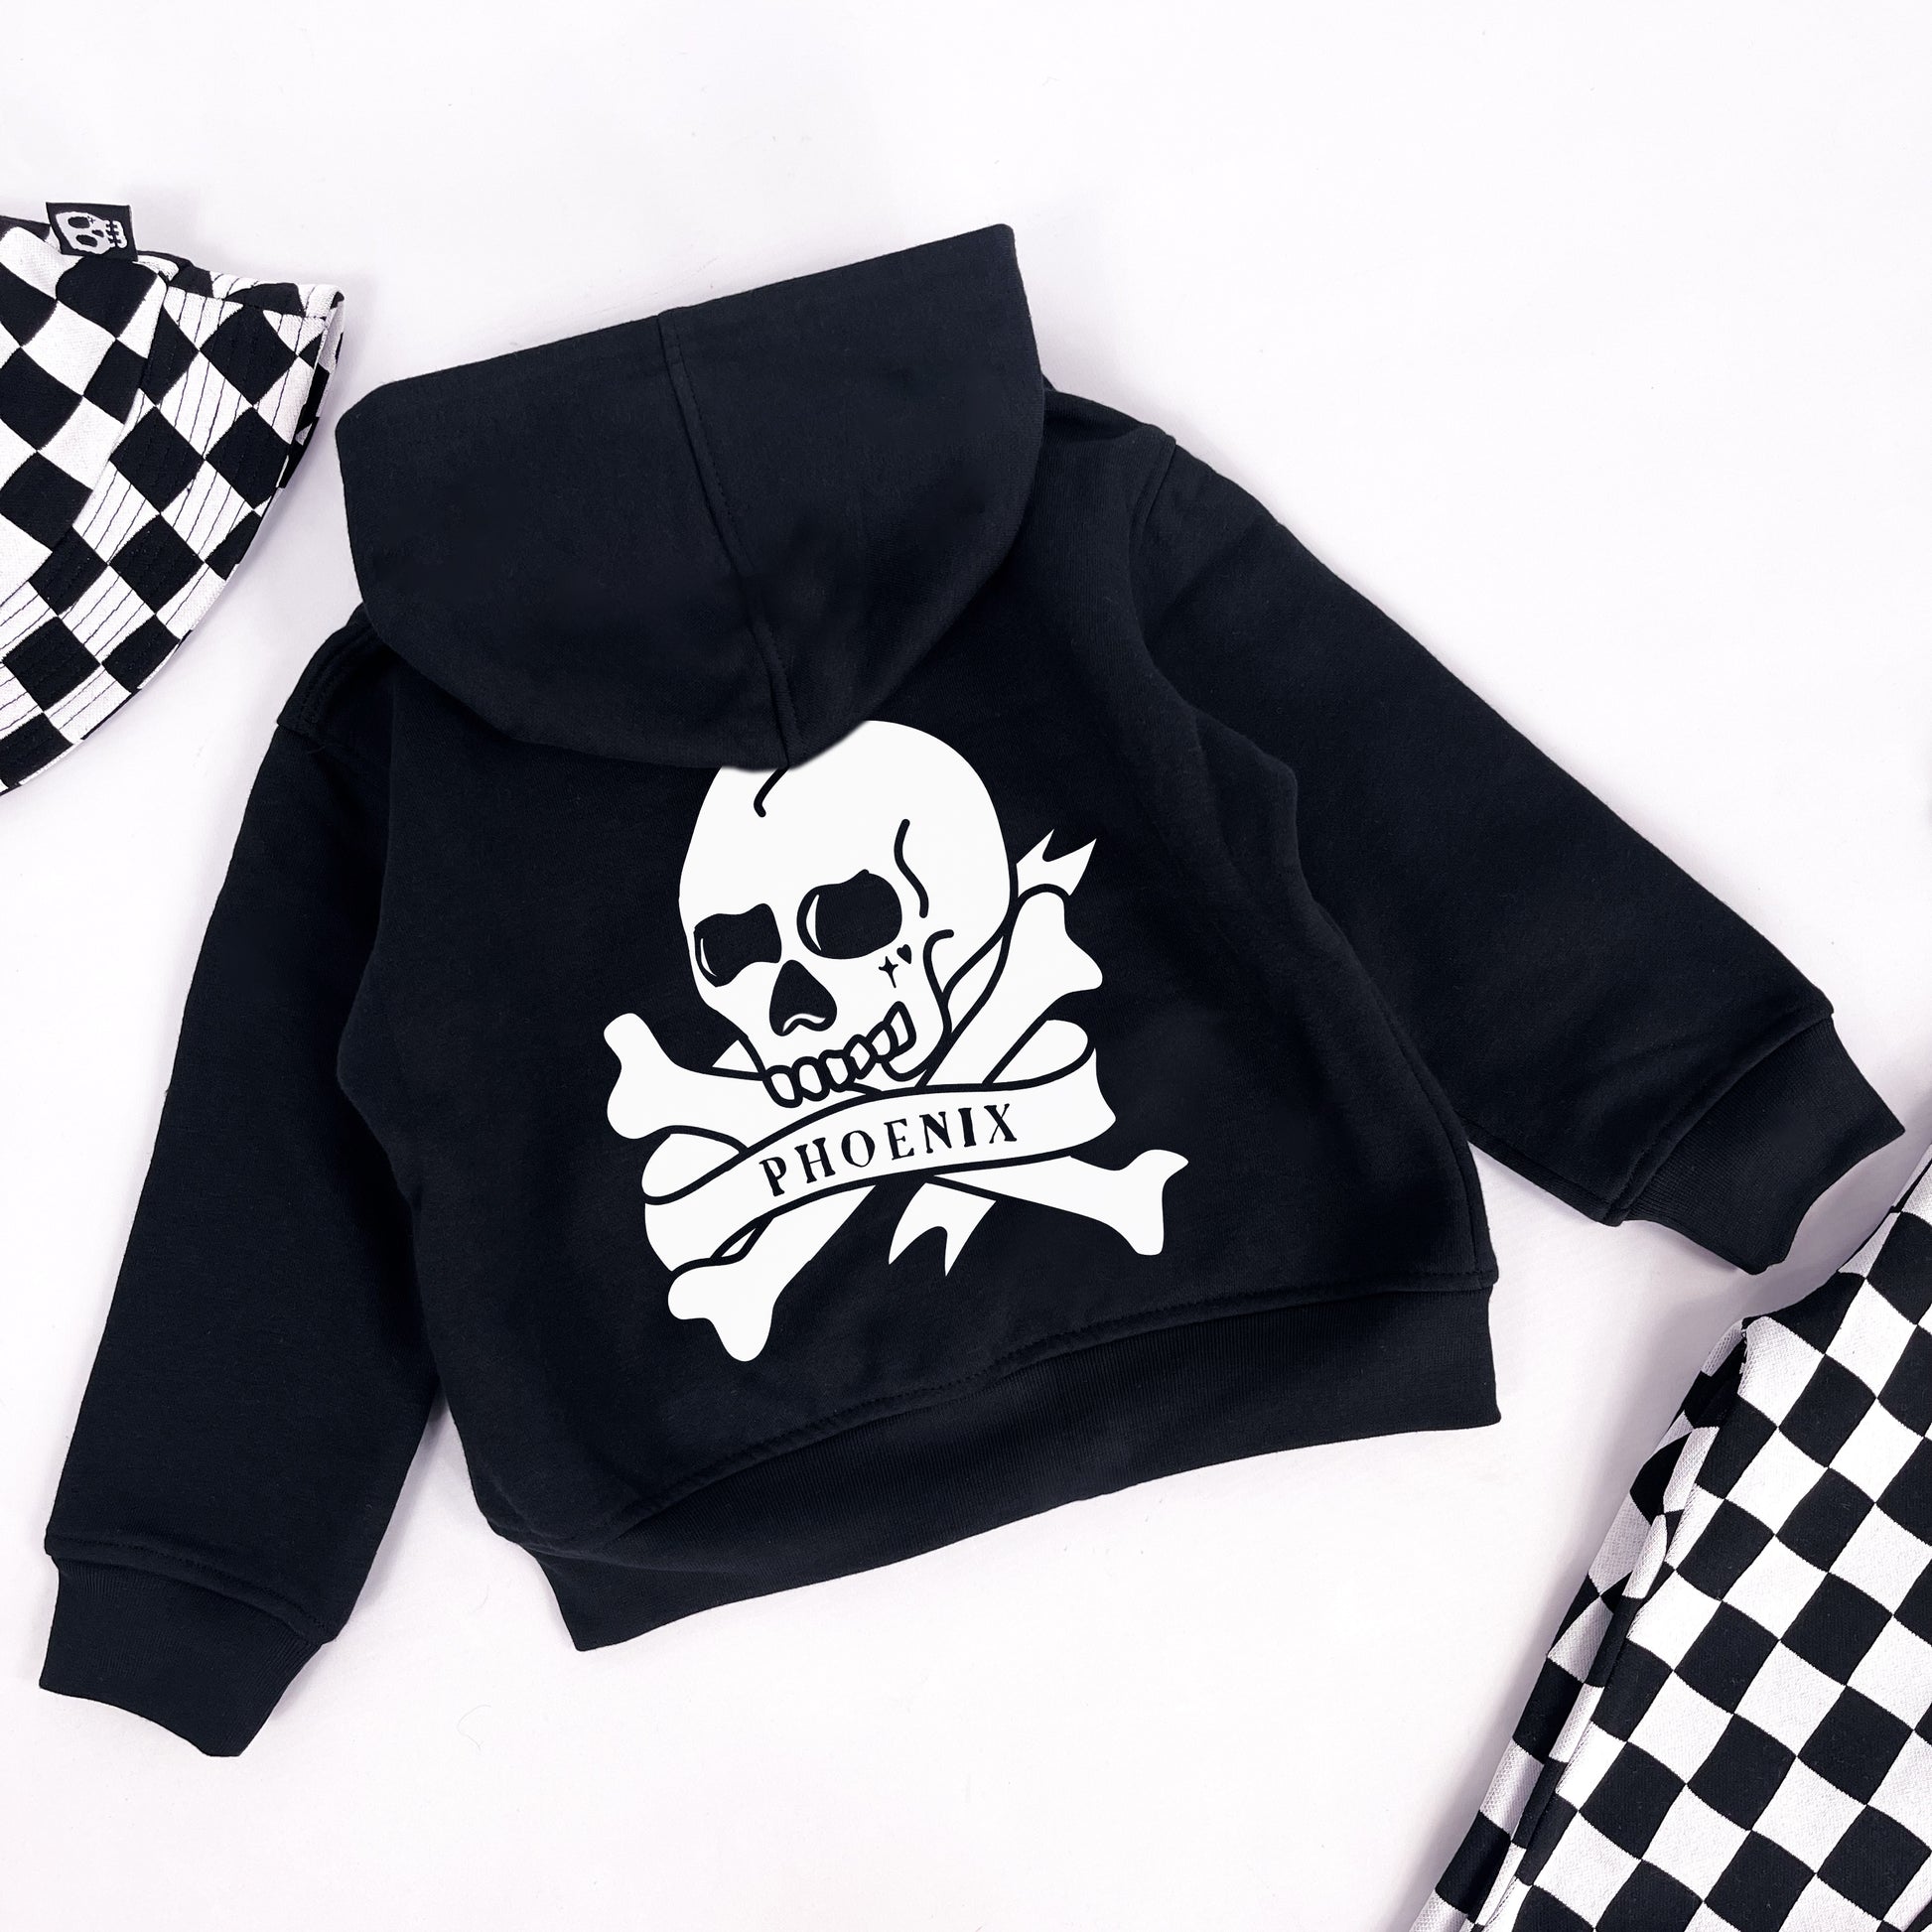 Personalised kids hoodie with tattoo style skull and custom name printing